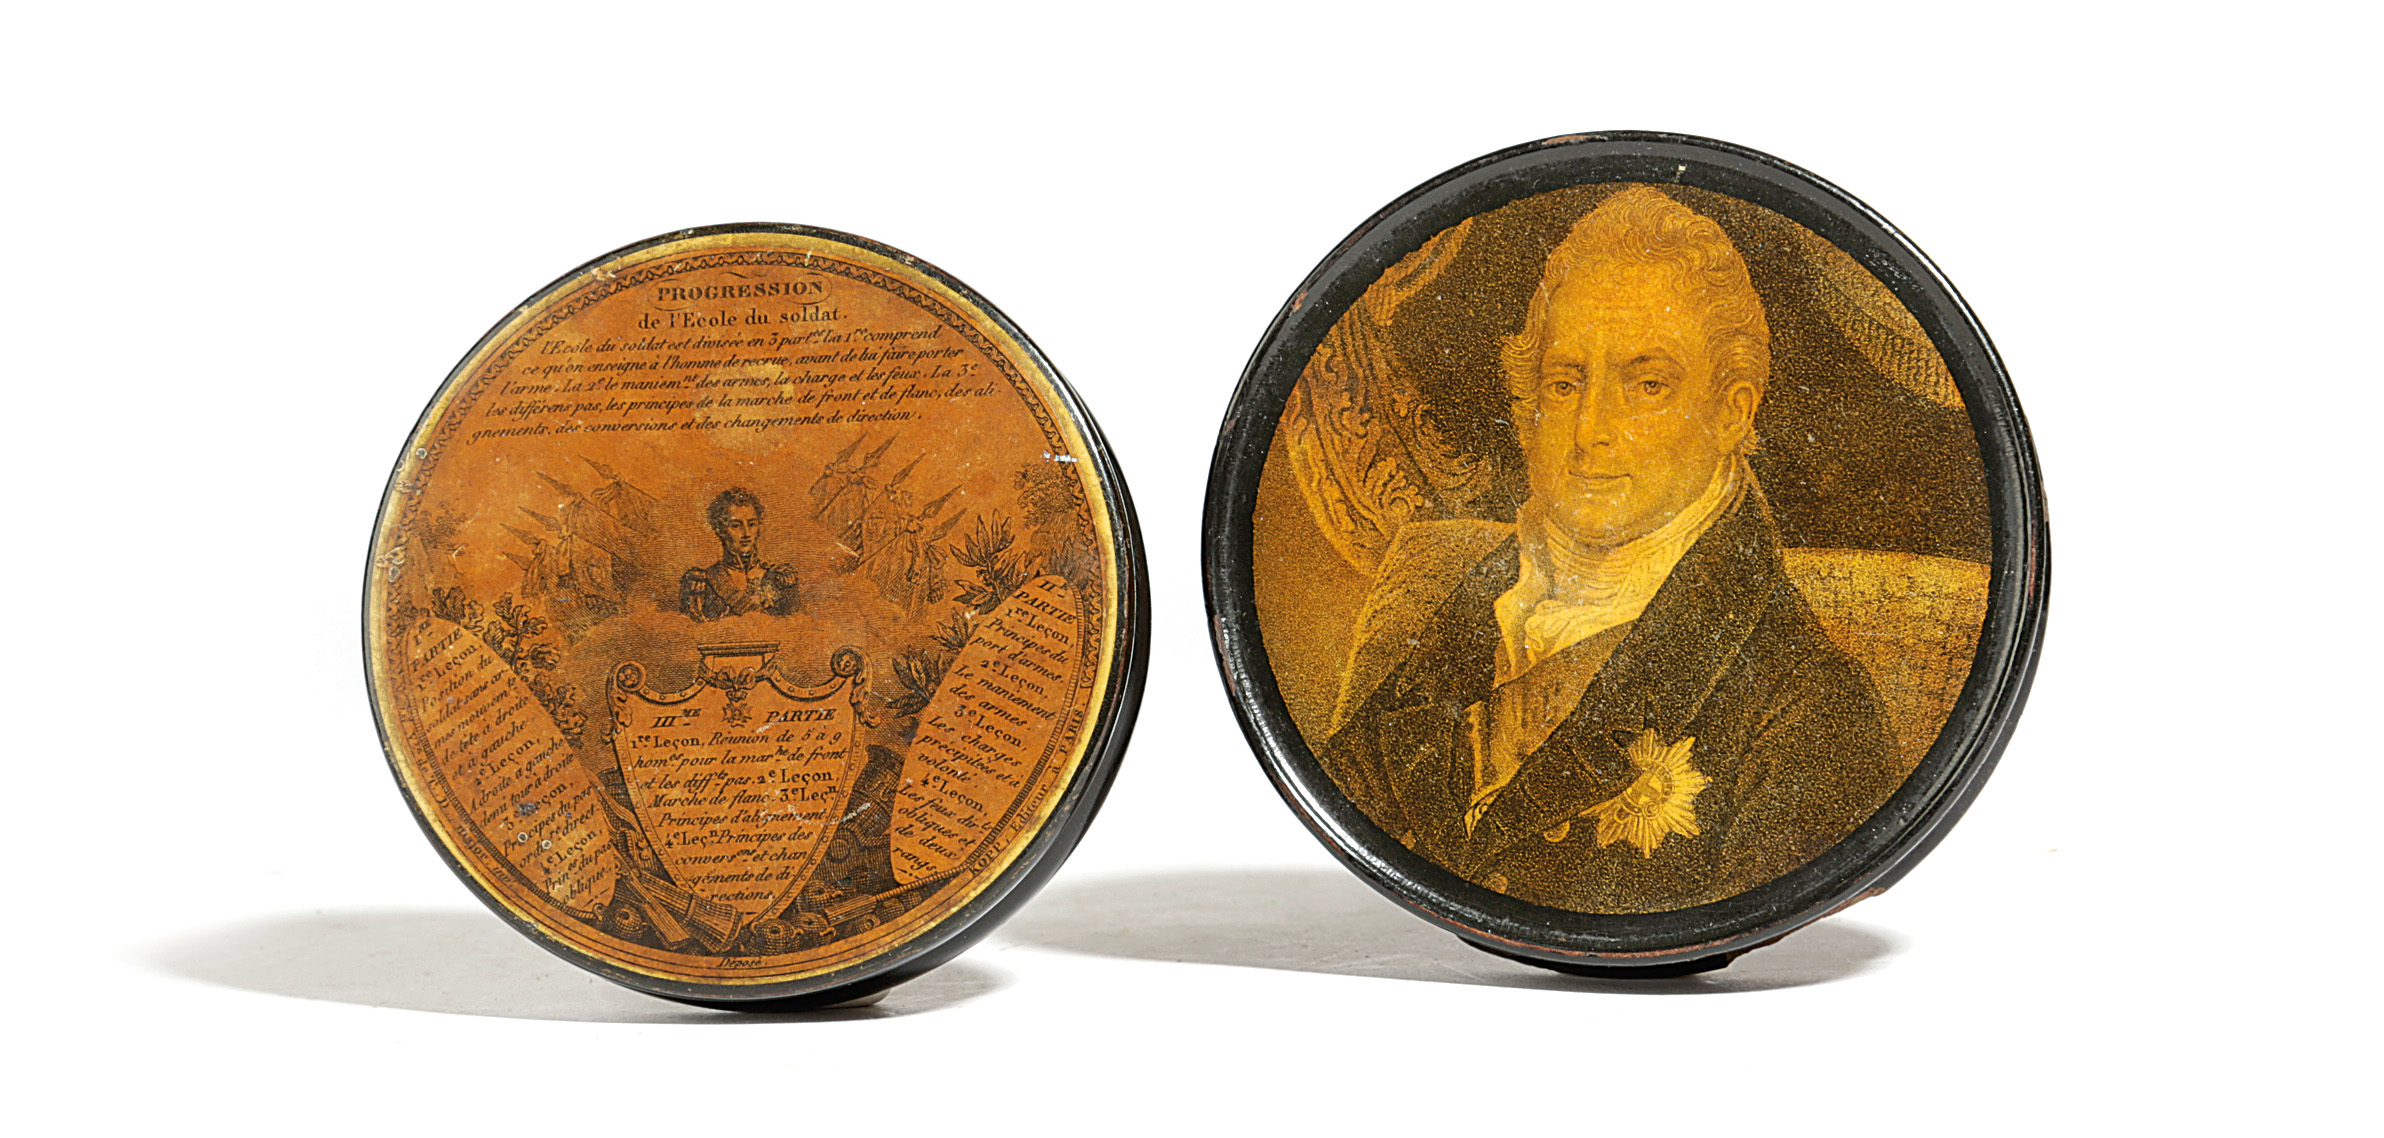 A FRENCH PAPIER-MACHE SNUFF BOX EARLY 19TH CENTURY printed with the 'Progression de l'Ecole du